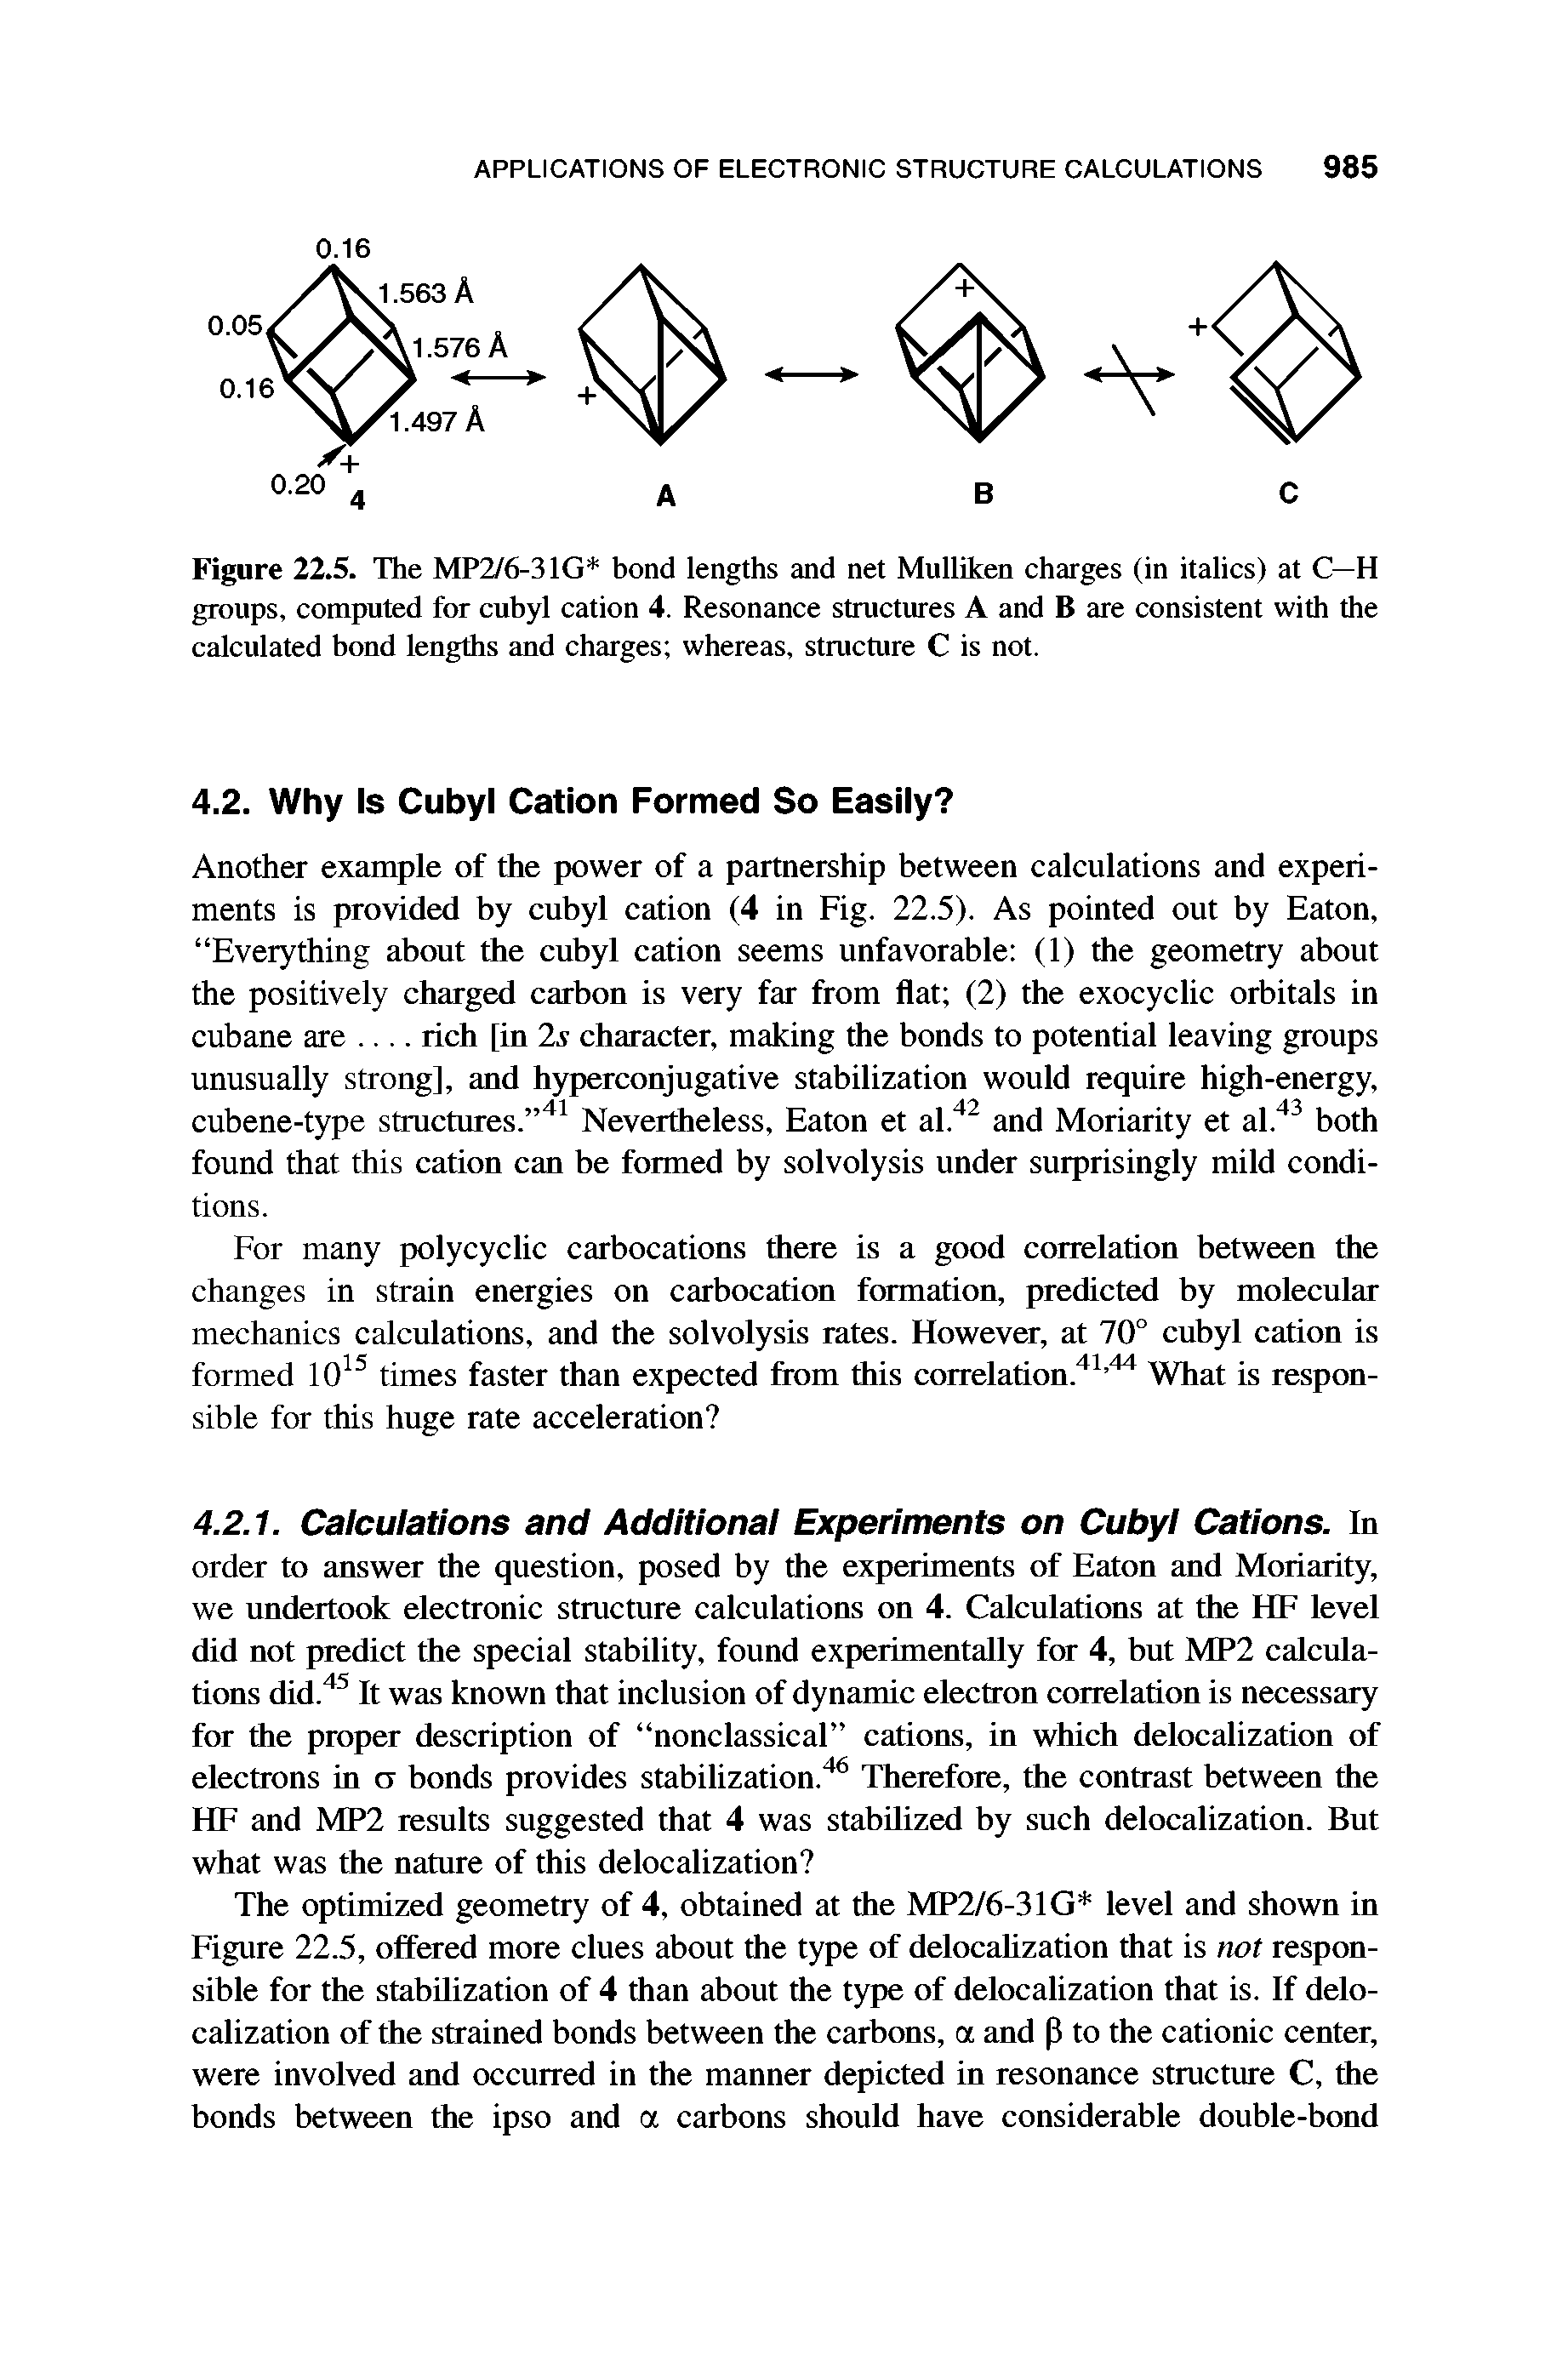 Figure 22.5. The MP2/6-31G bond lengths and net Mulliken charges (in italics) at C—H groups, computed for cubyl cation 4. Resonance structures A and B are consistent with the calculated bond lengths and charges whereas, structure C is not.